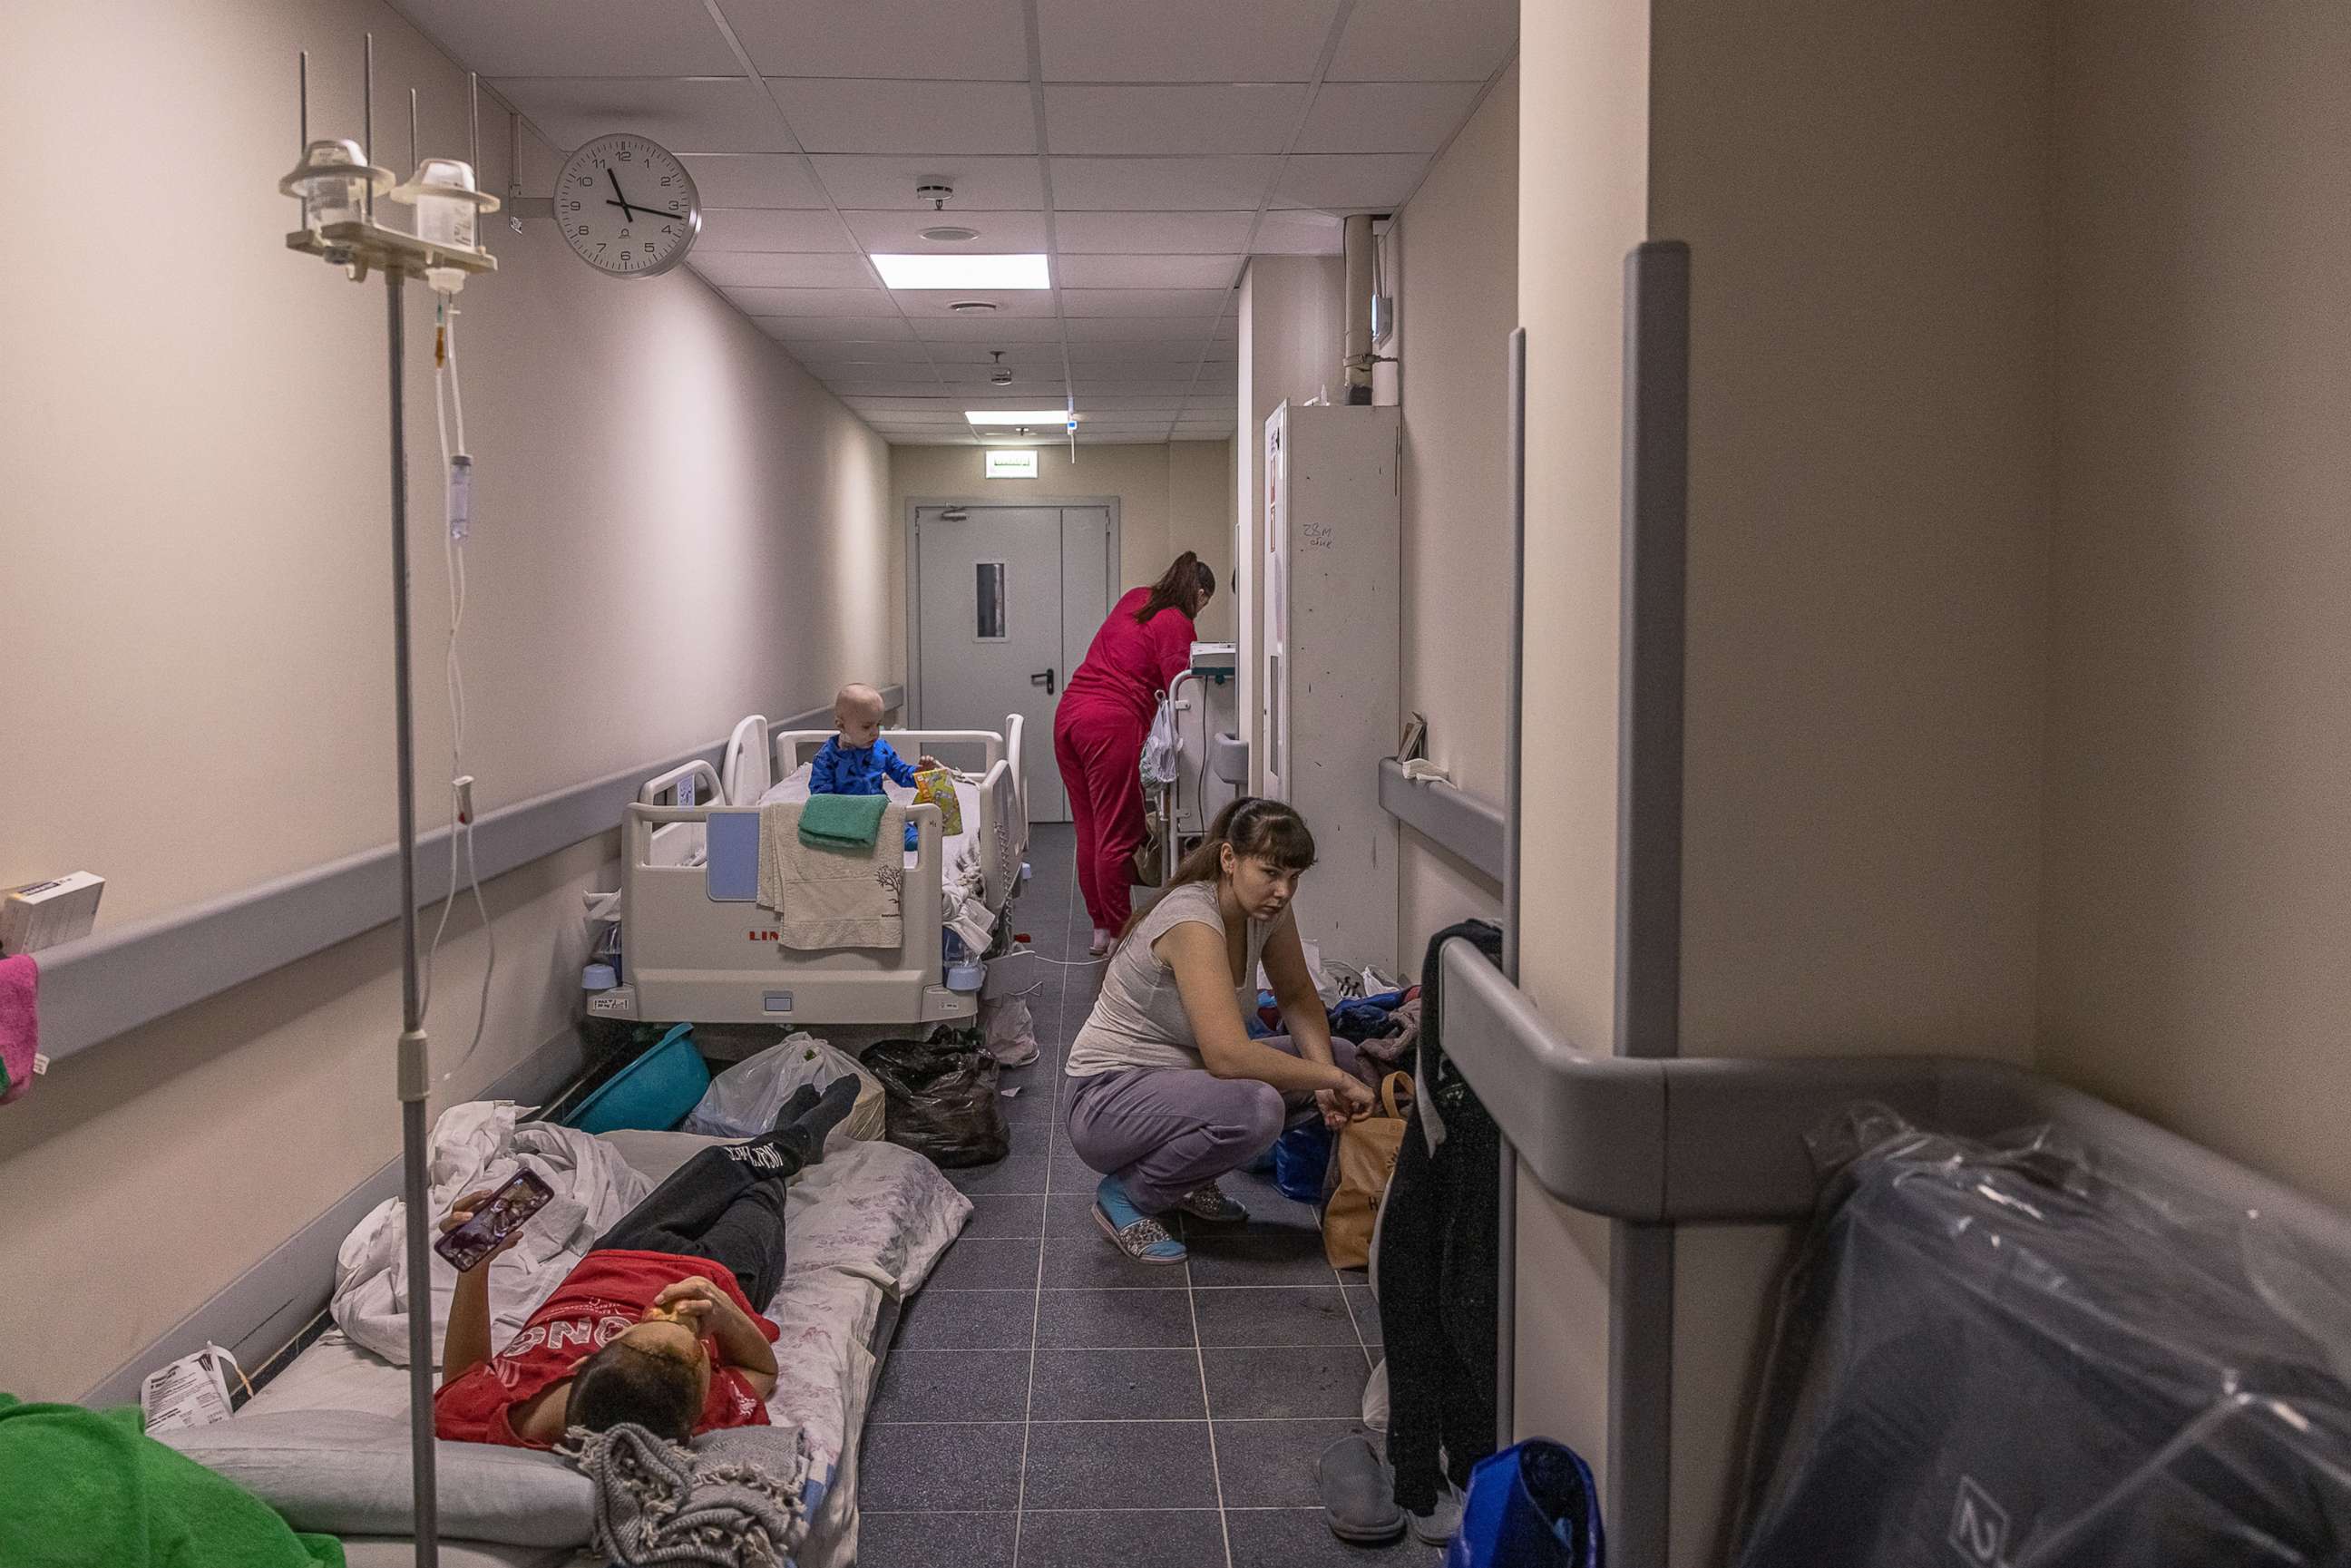 PHOTO: MParents stand next to their children being treated in the children's hospital basement, which is also being used as a shelter, March 1, 2022, in Kyiv, Ukraine.